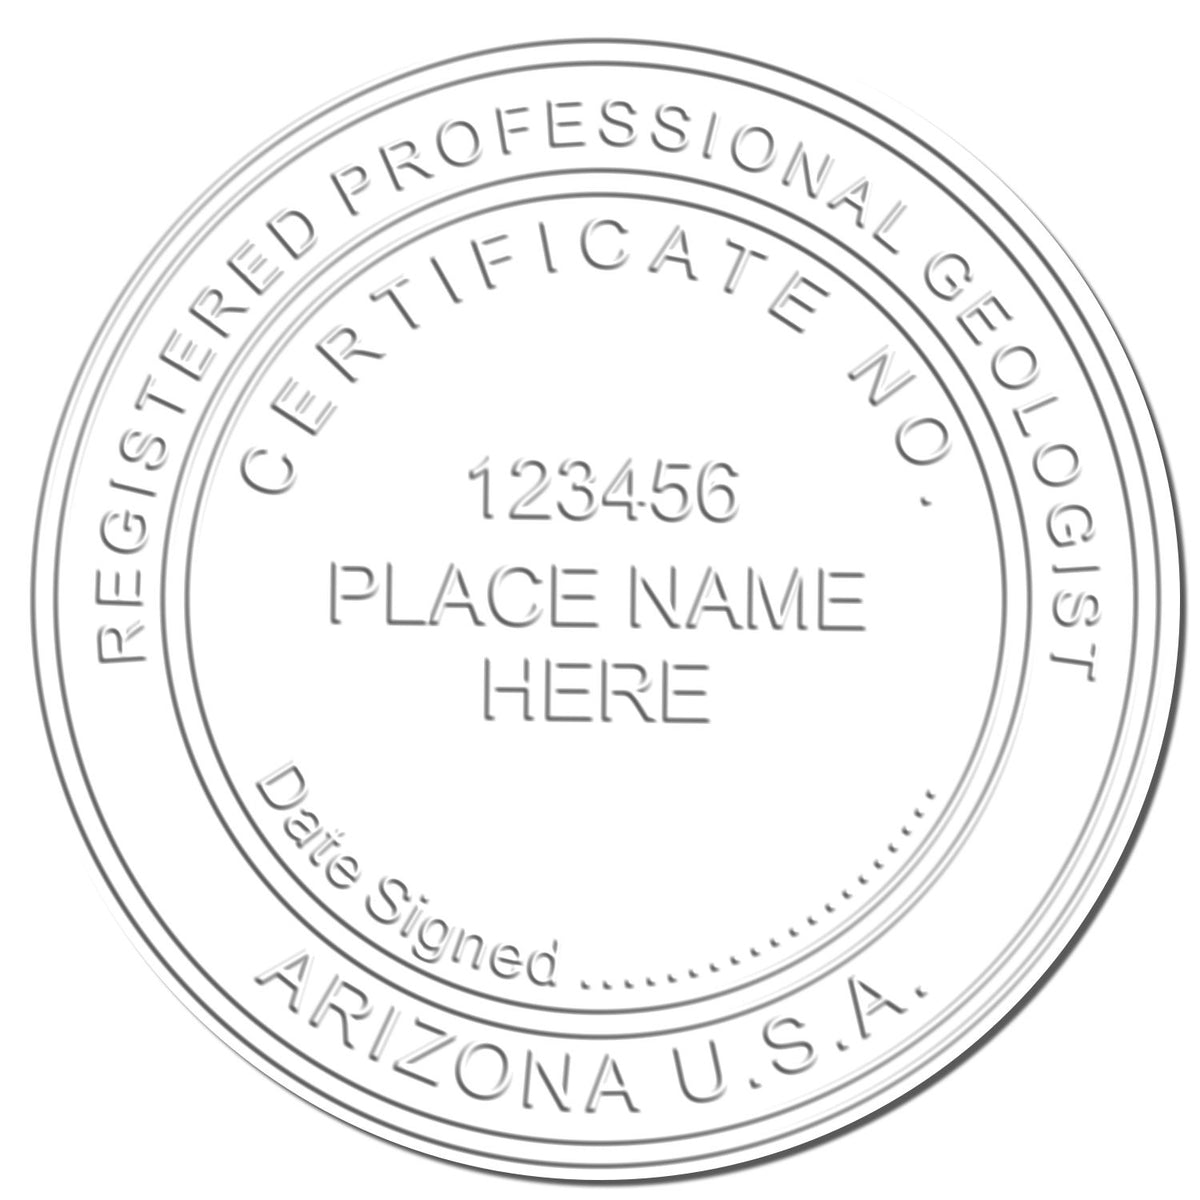 The Arizona Geologist Desk Seal stamp impression comes to life with a crisp, detailed image stamped on paper - showcasing true professional quality.